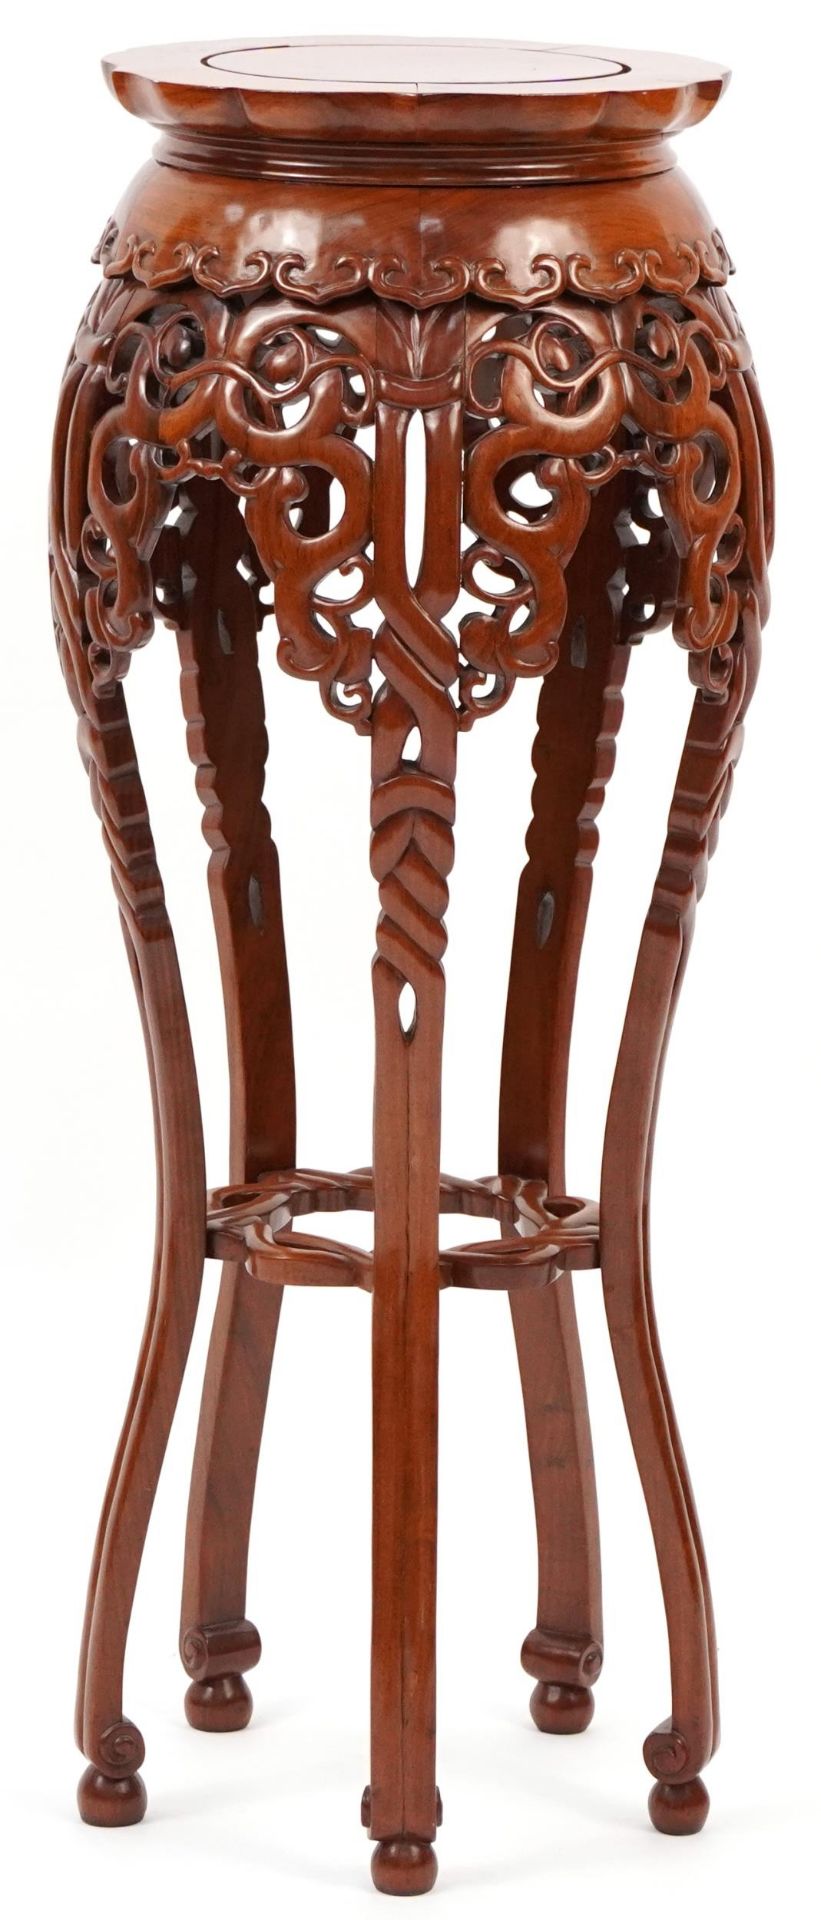 Chinese carved hardwood plant stand, 87cm high - Image 2 of 3